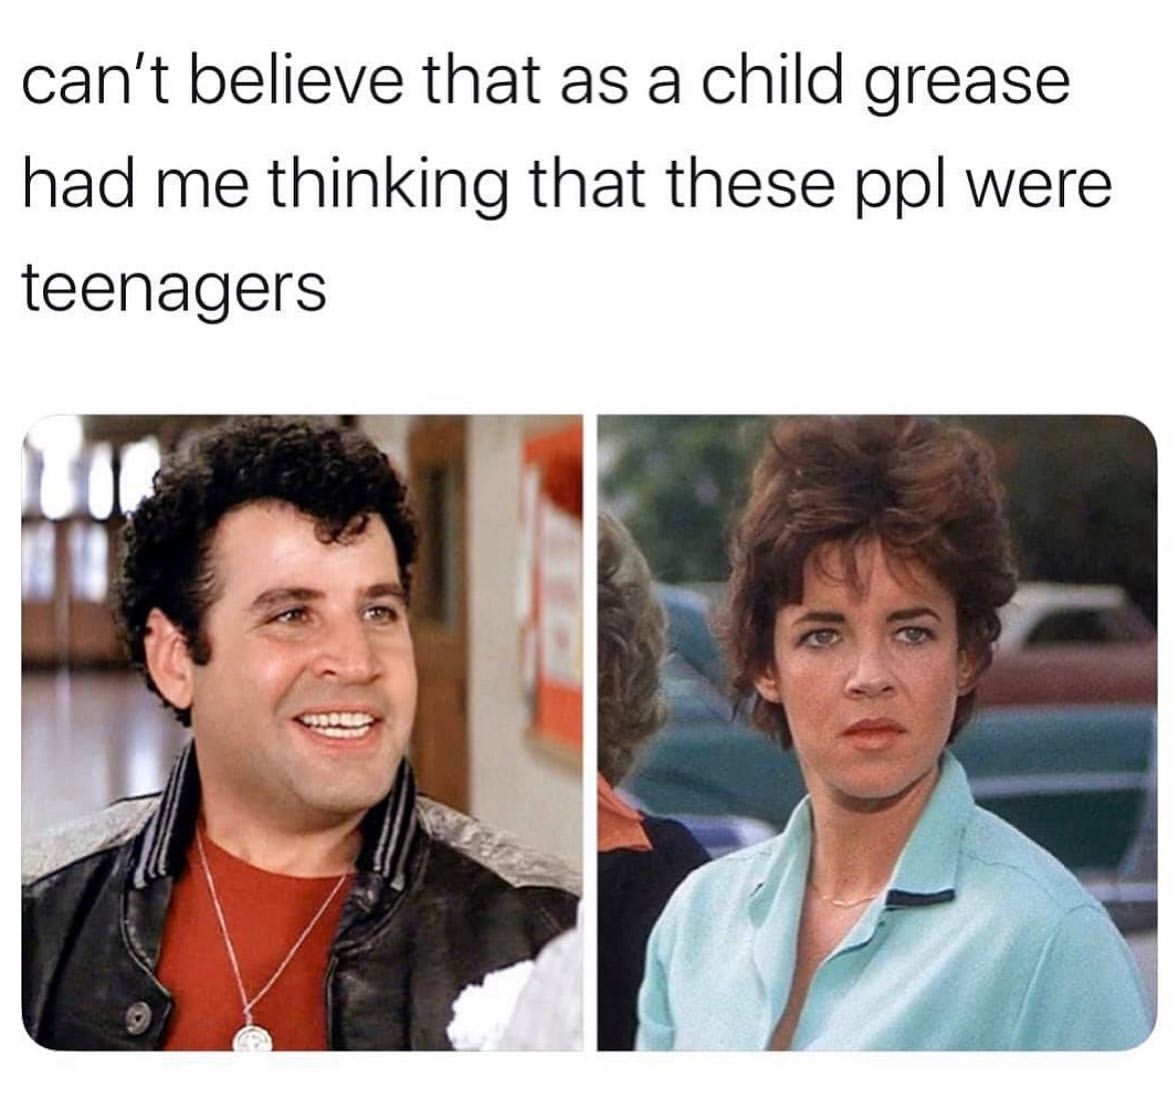 Can't believe that as a child grease had me thinking that these ppl were teenagers.